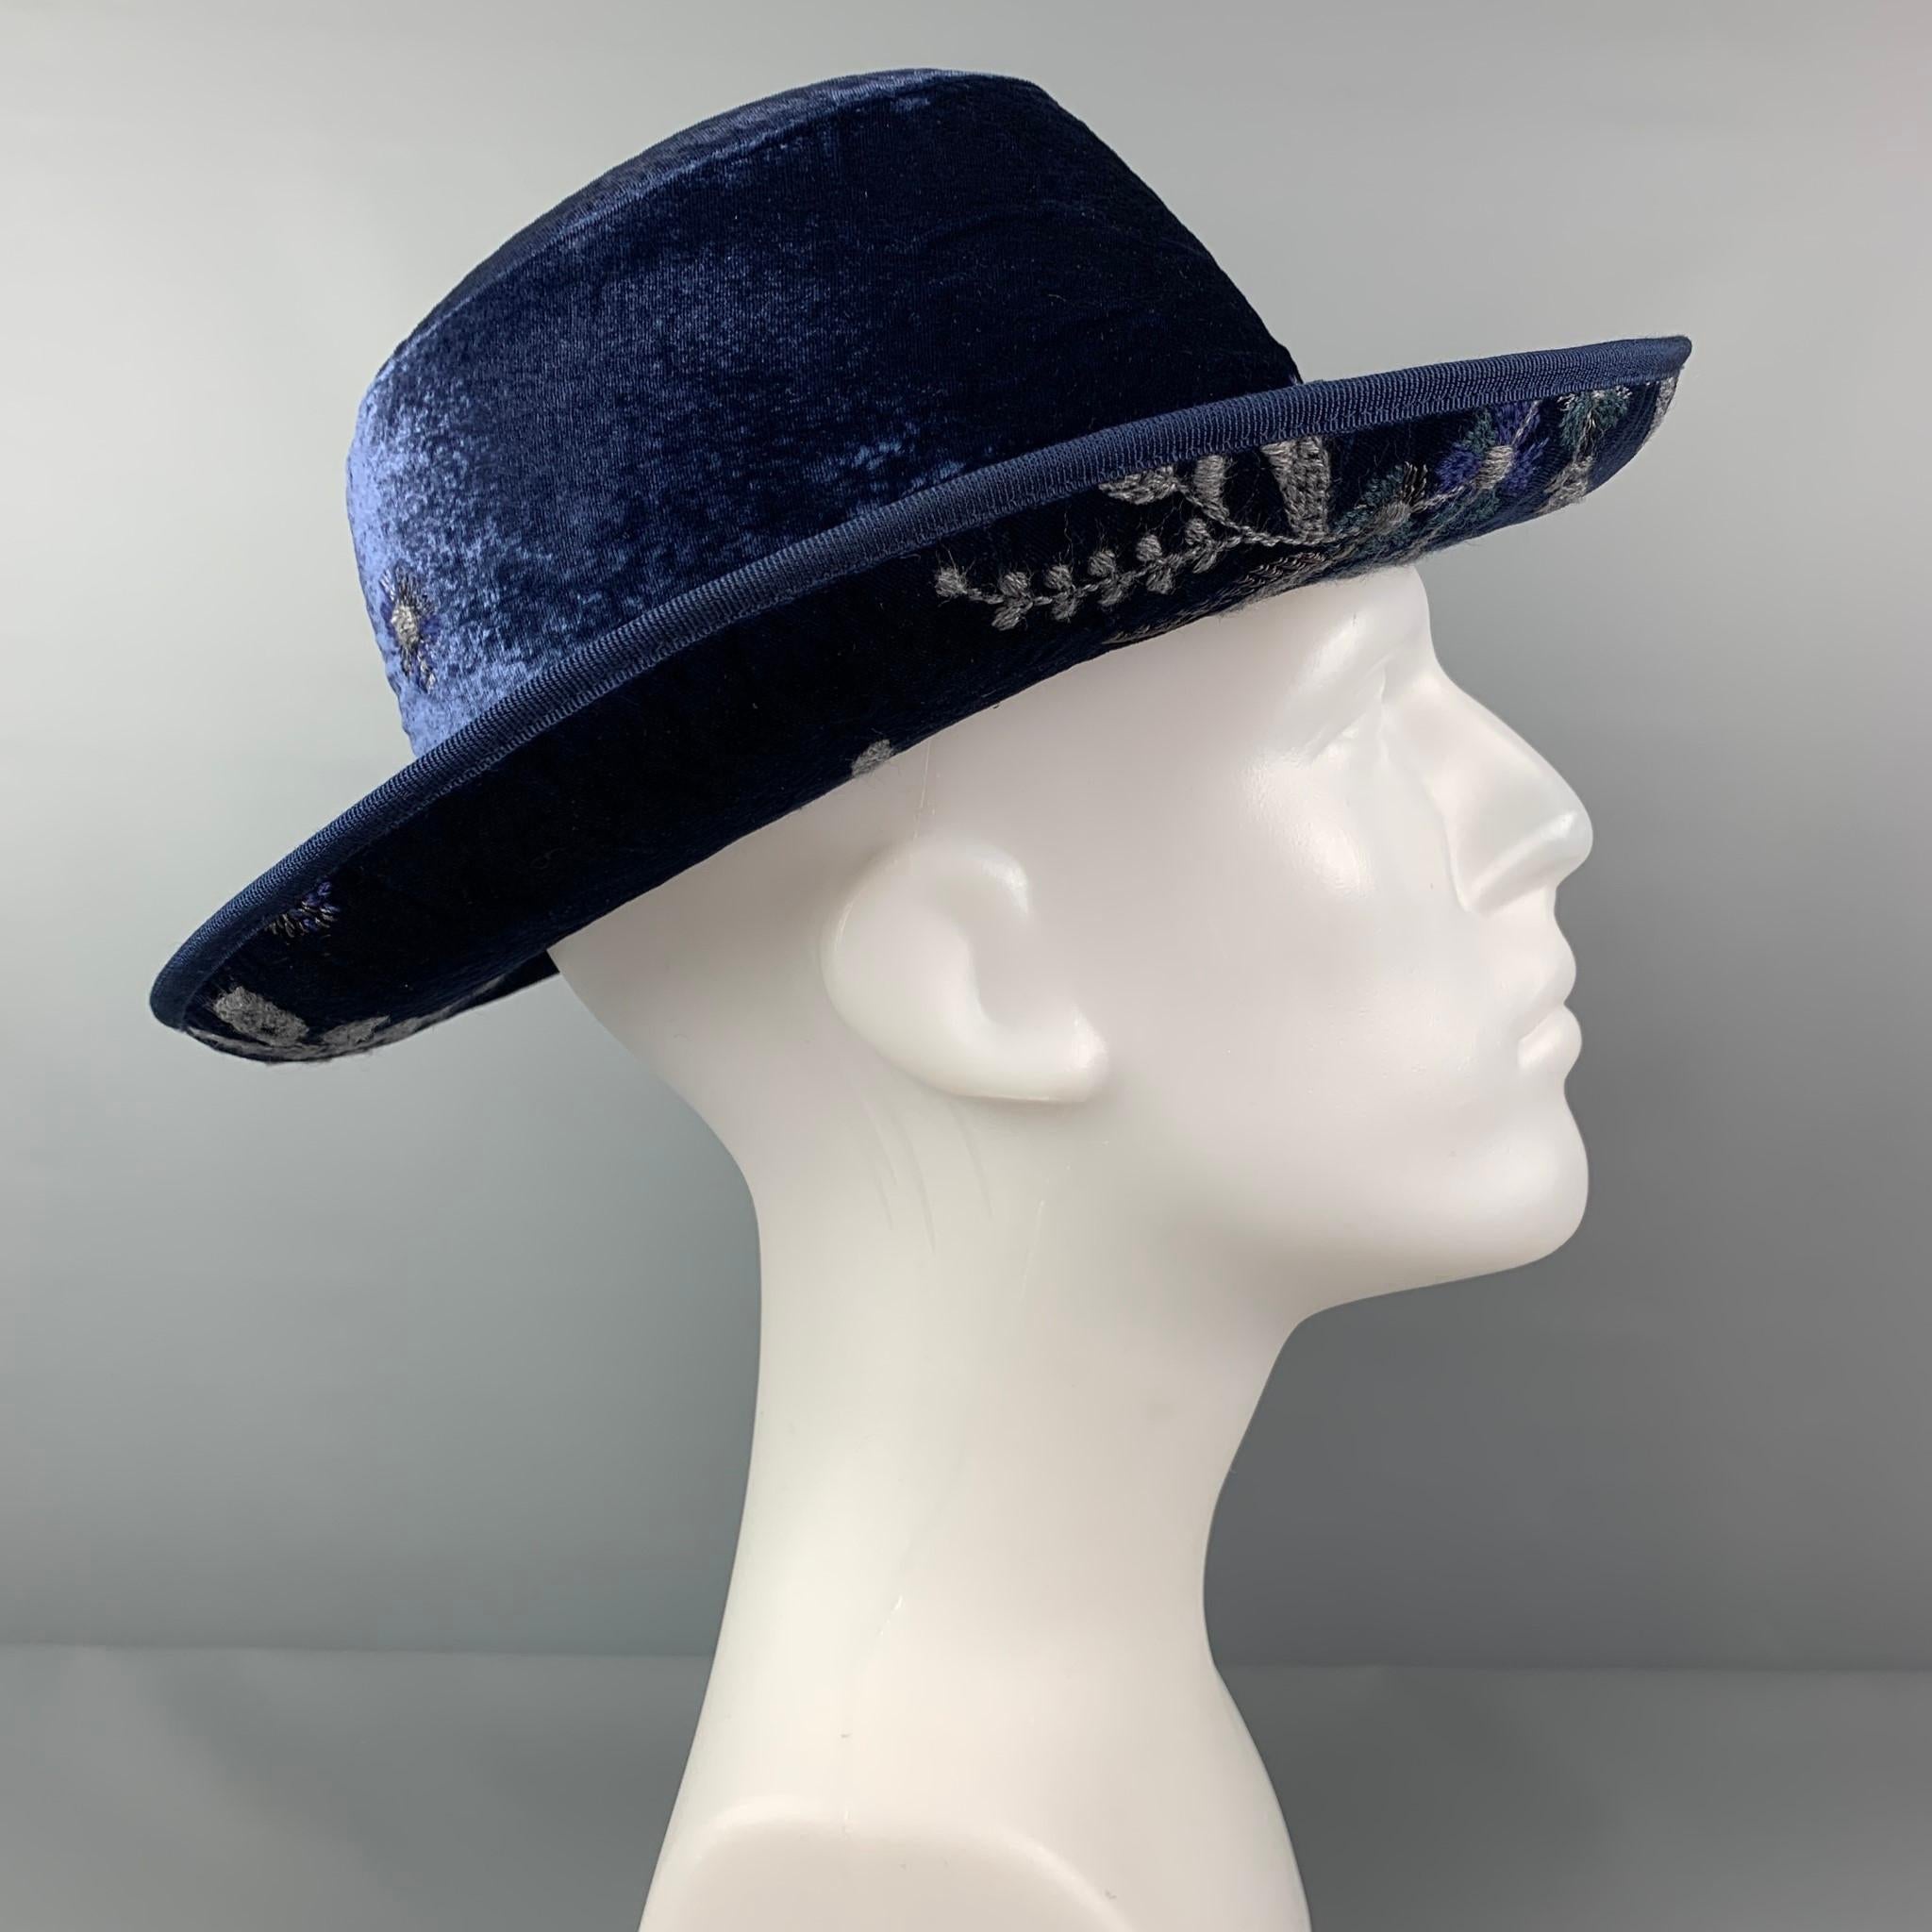 GIORGIO ARMANI hat comes in a blue velvet featuring grey embroidered design and a ribbon trim. Made in Italy. 

Very Good Pre-Owned Condition.
Marked: 59

Measurements:

Opening: 21 in.
Brim: 3 in.
Height: 4 in. 